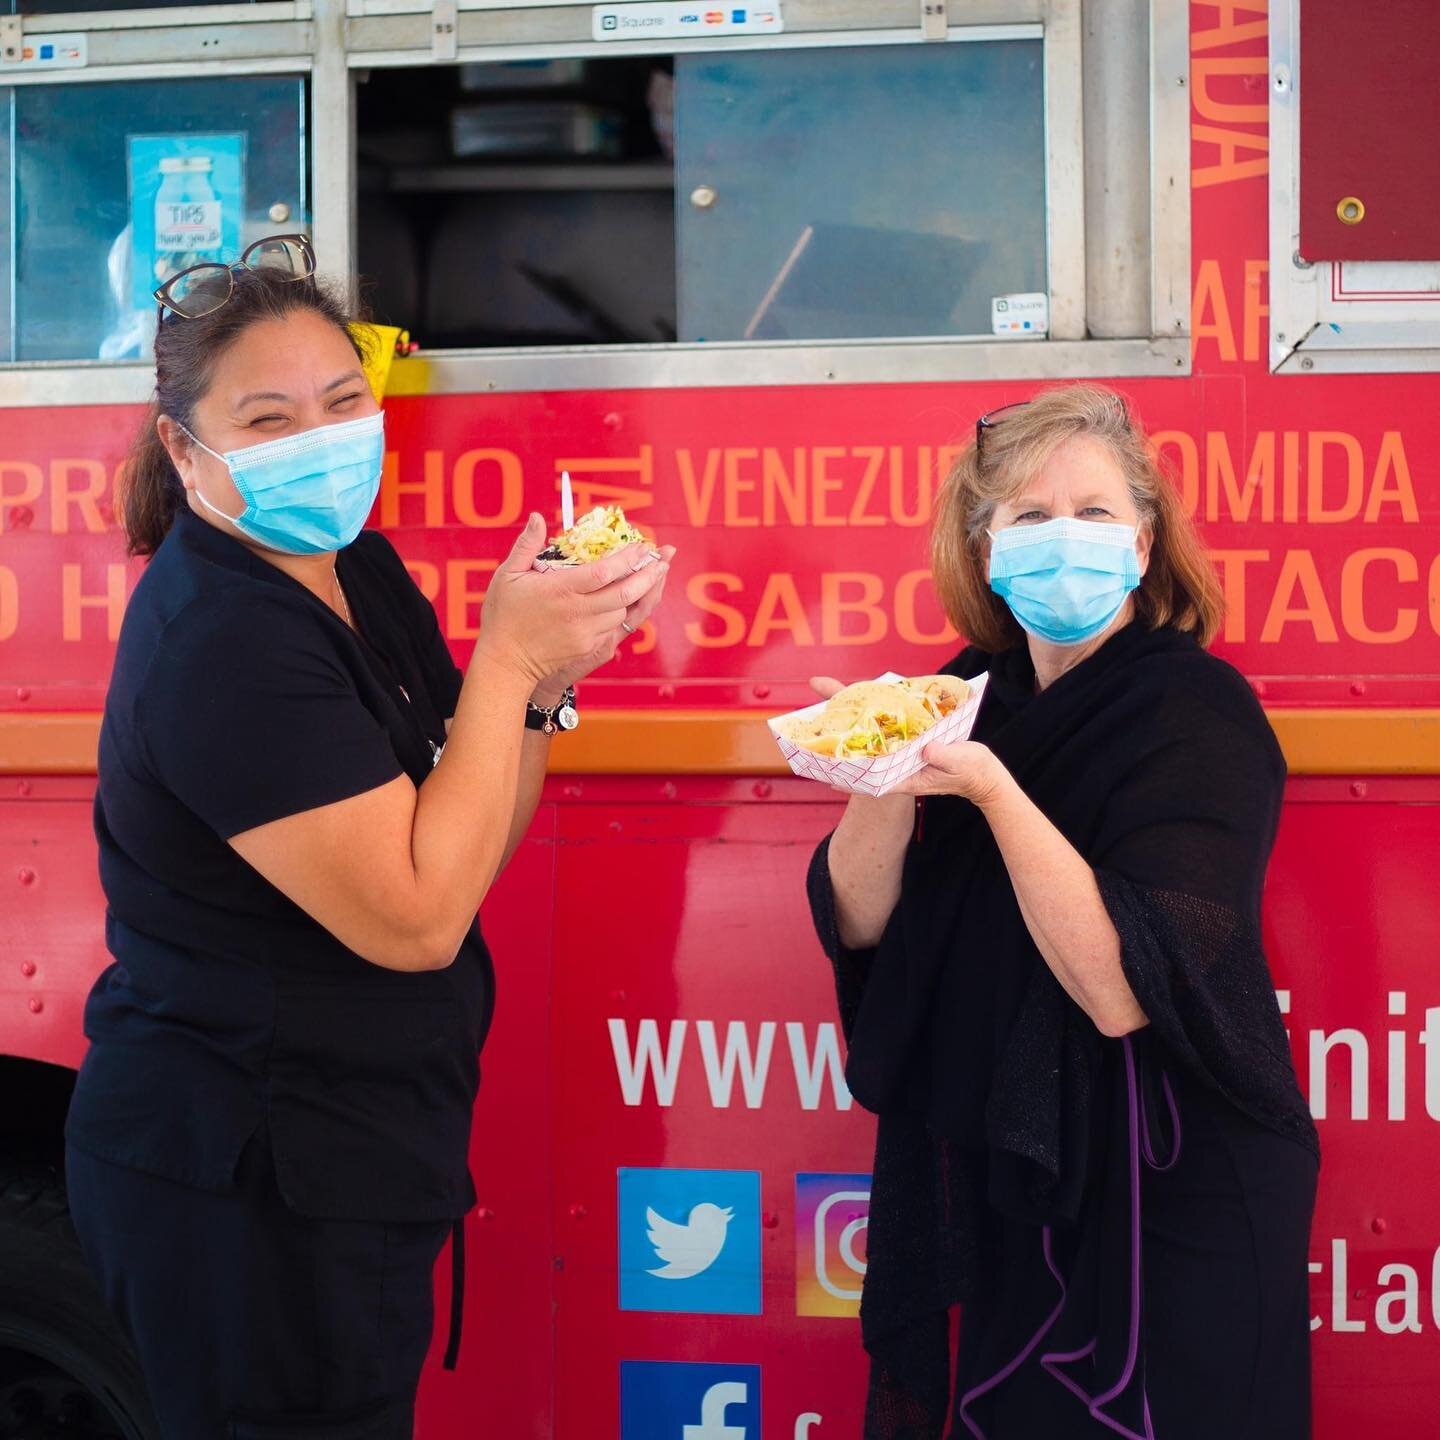 We love catering Employee Appreciation Events! Show your team how awesome they are with #allthetacos from our truck!